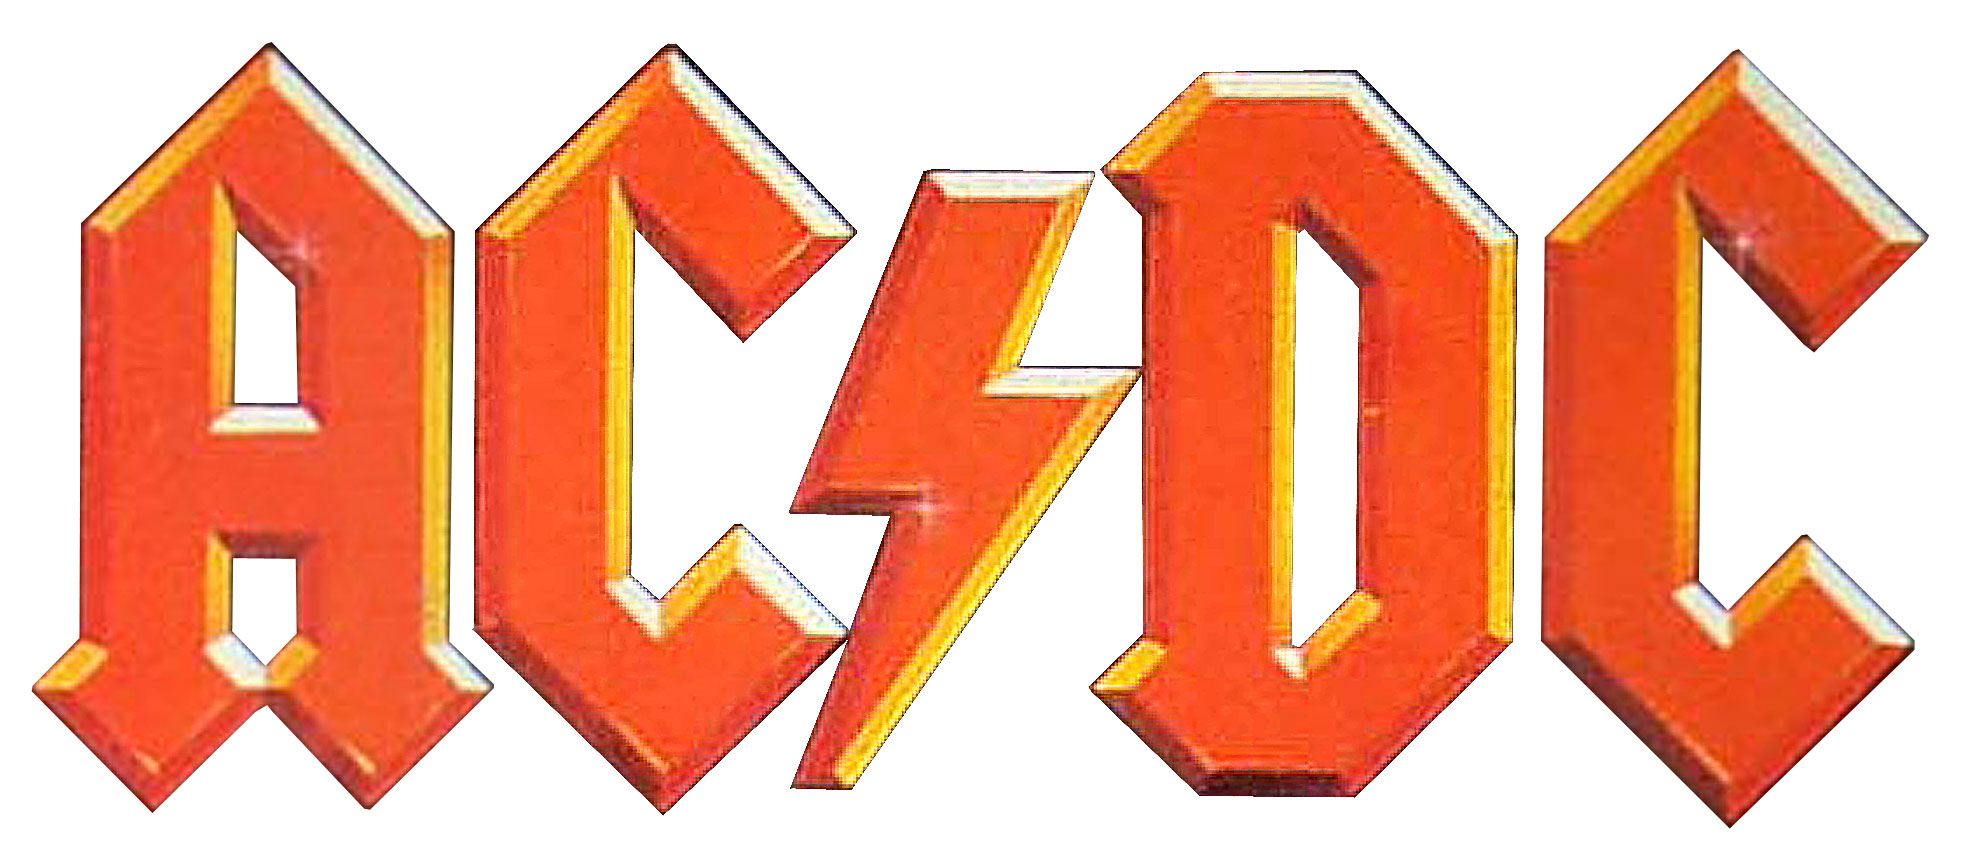 AC/DC and lettering | What's Font?